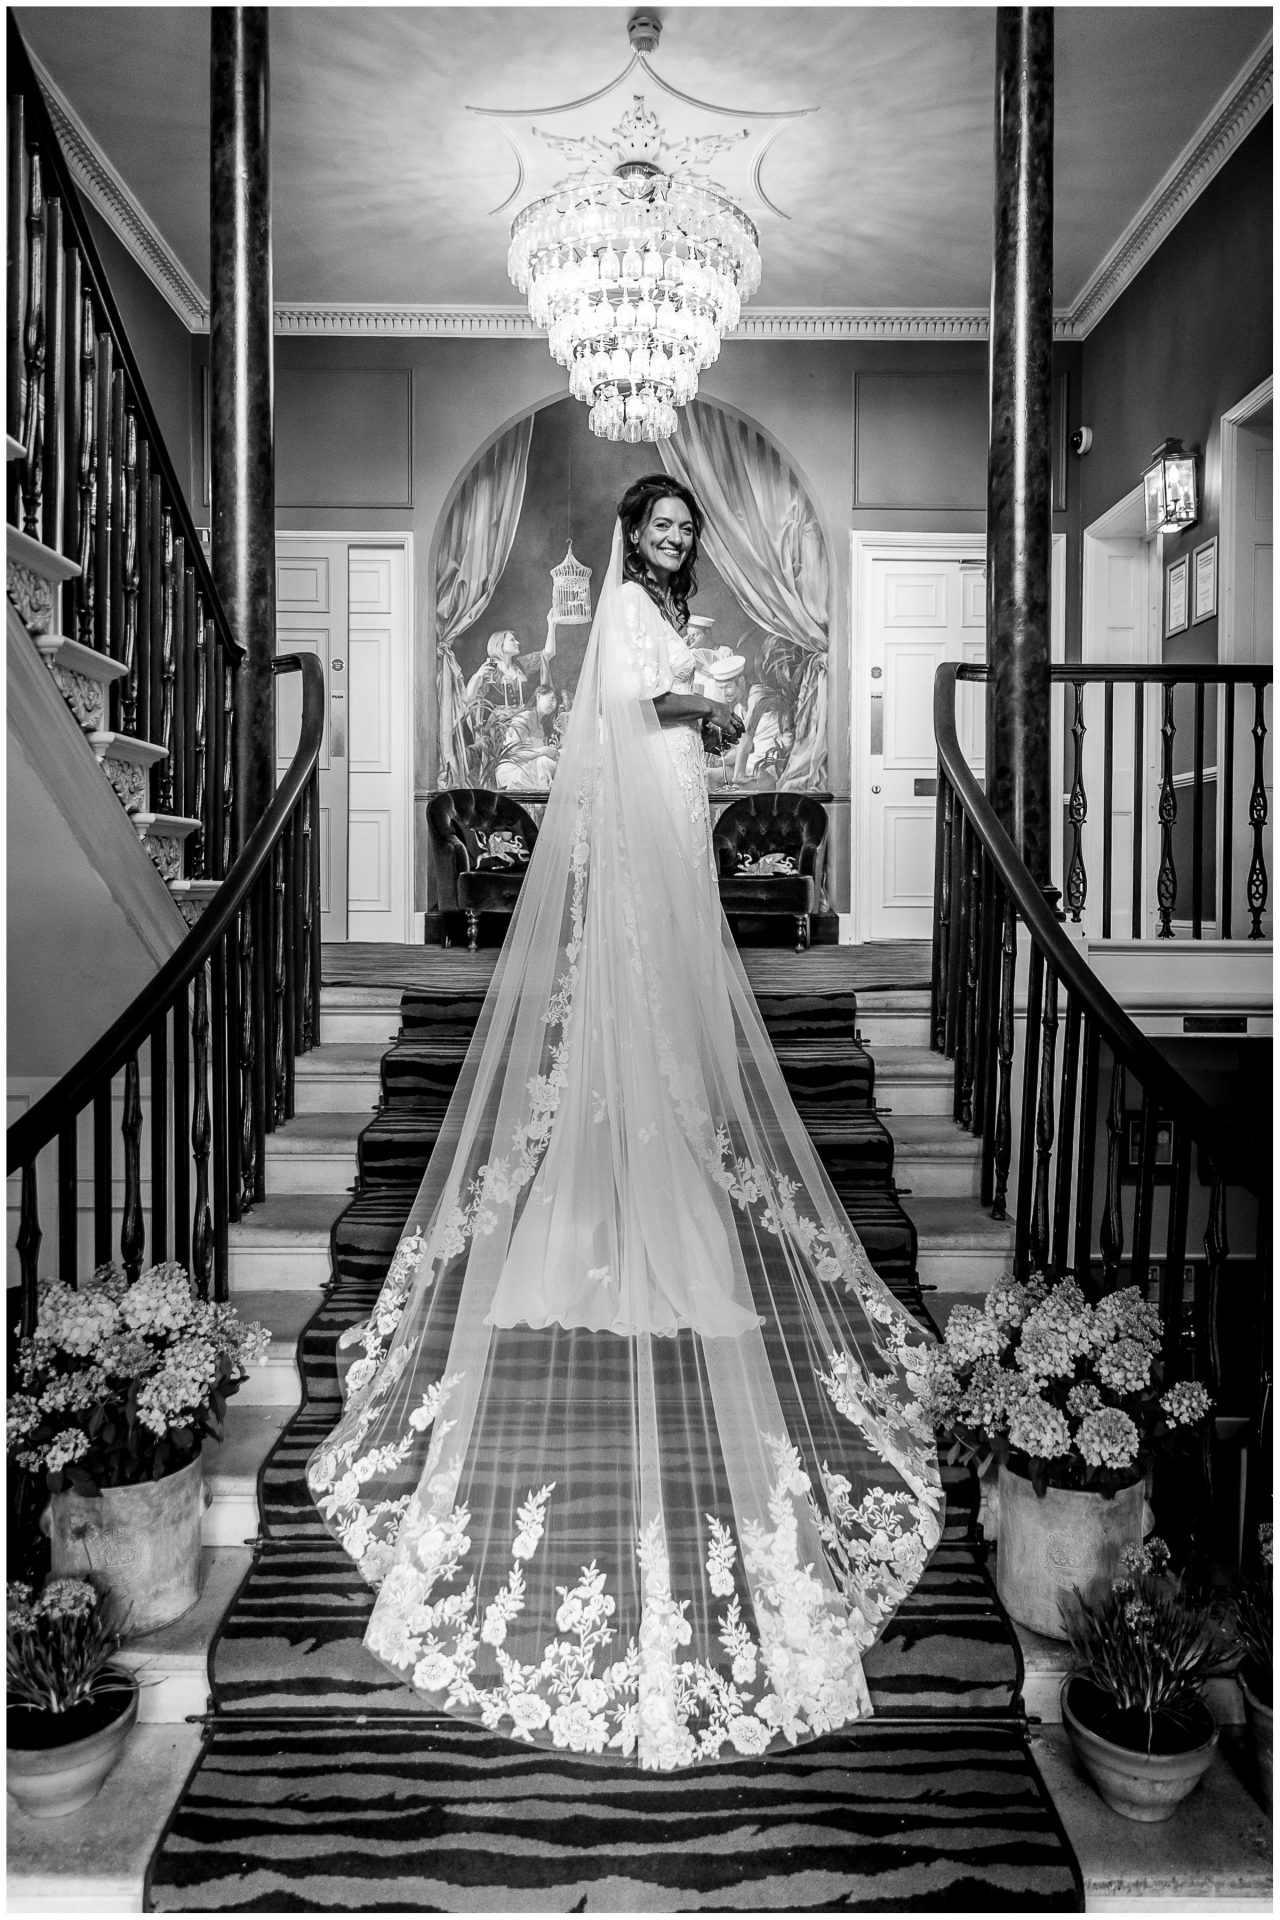 The bride displays her wedding dress and veil on the grand staircase in the lobby of the Poole Hotel du Vin